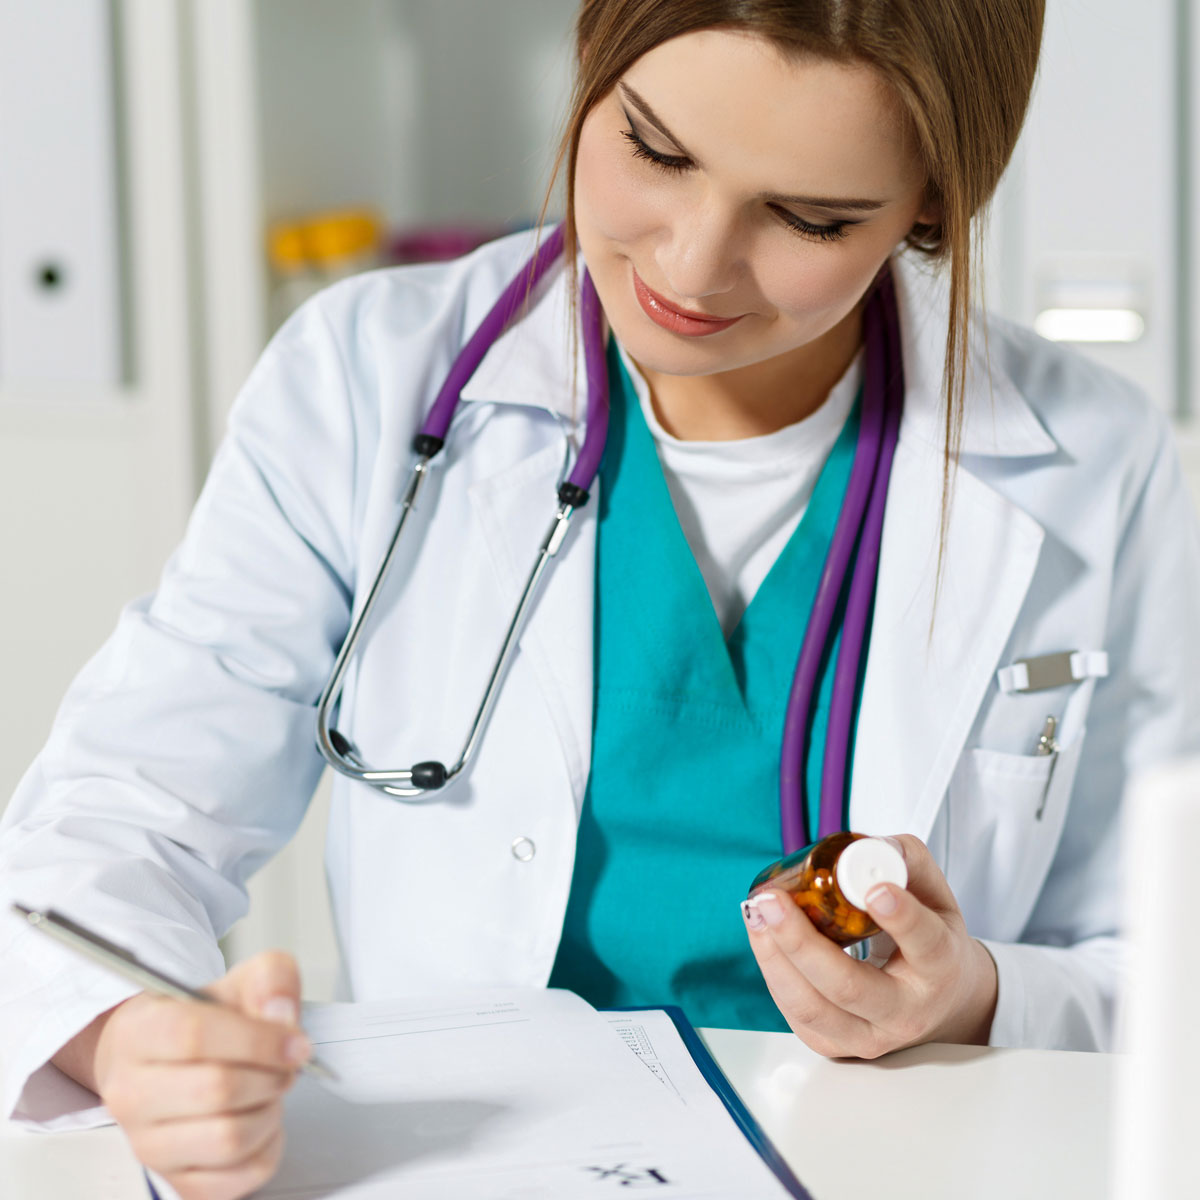 A doctor holding a prescription bottle while she writes down notes on a chart.